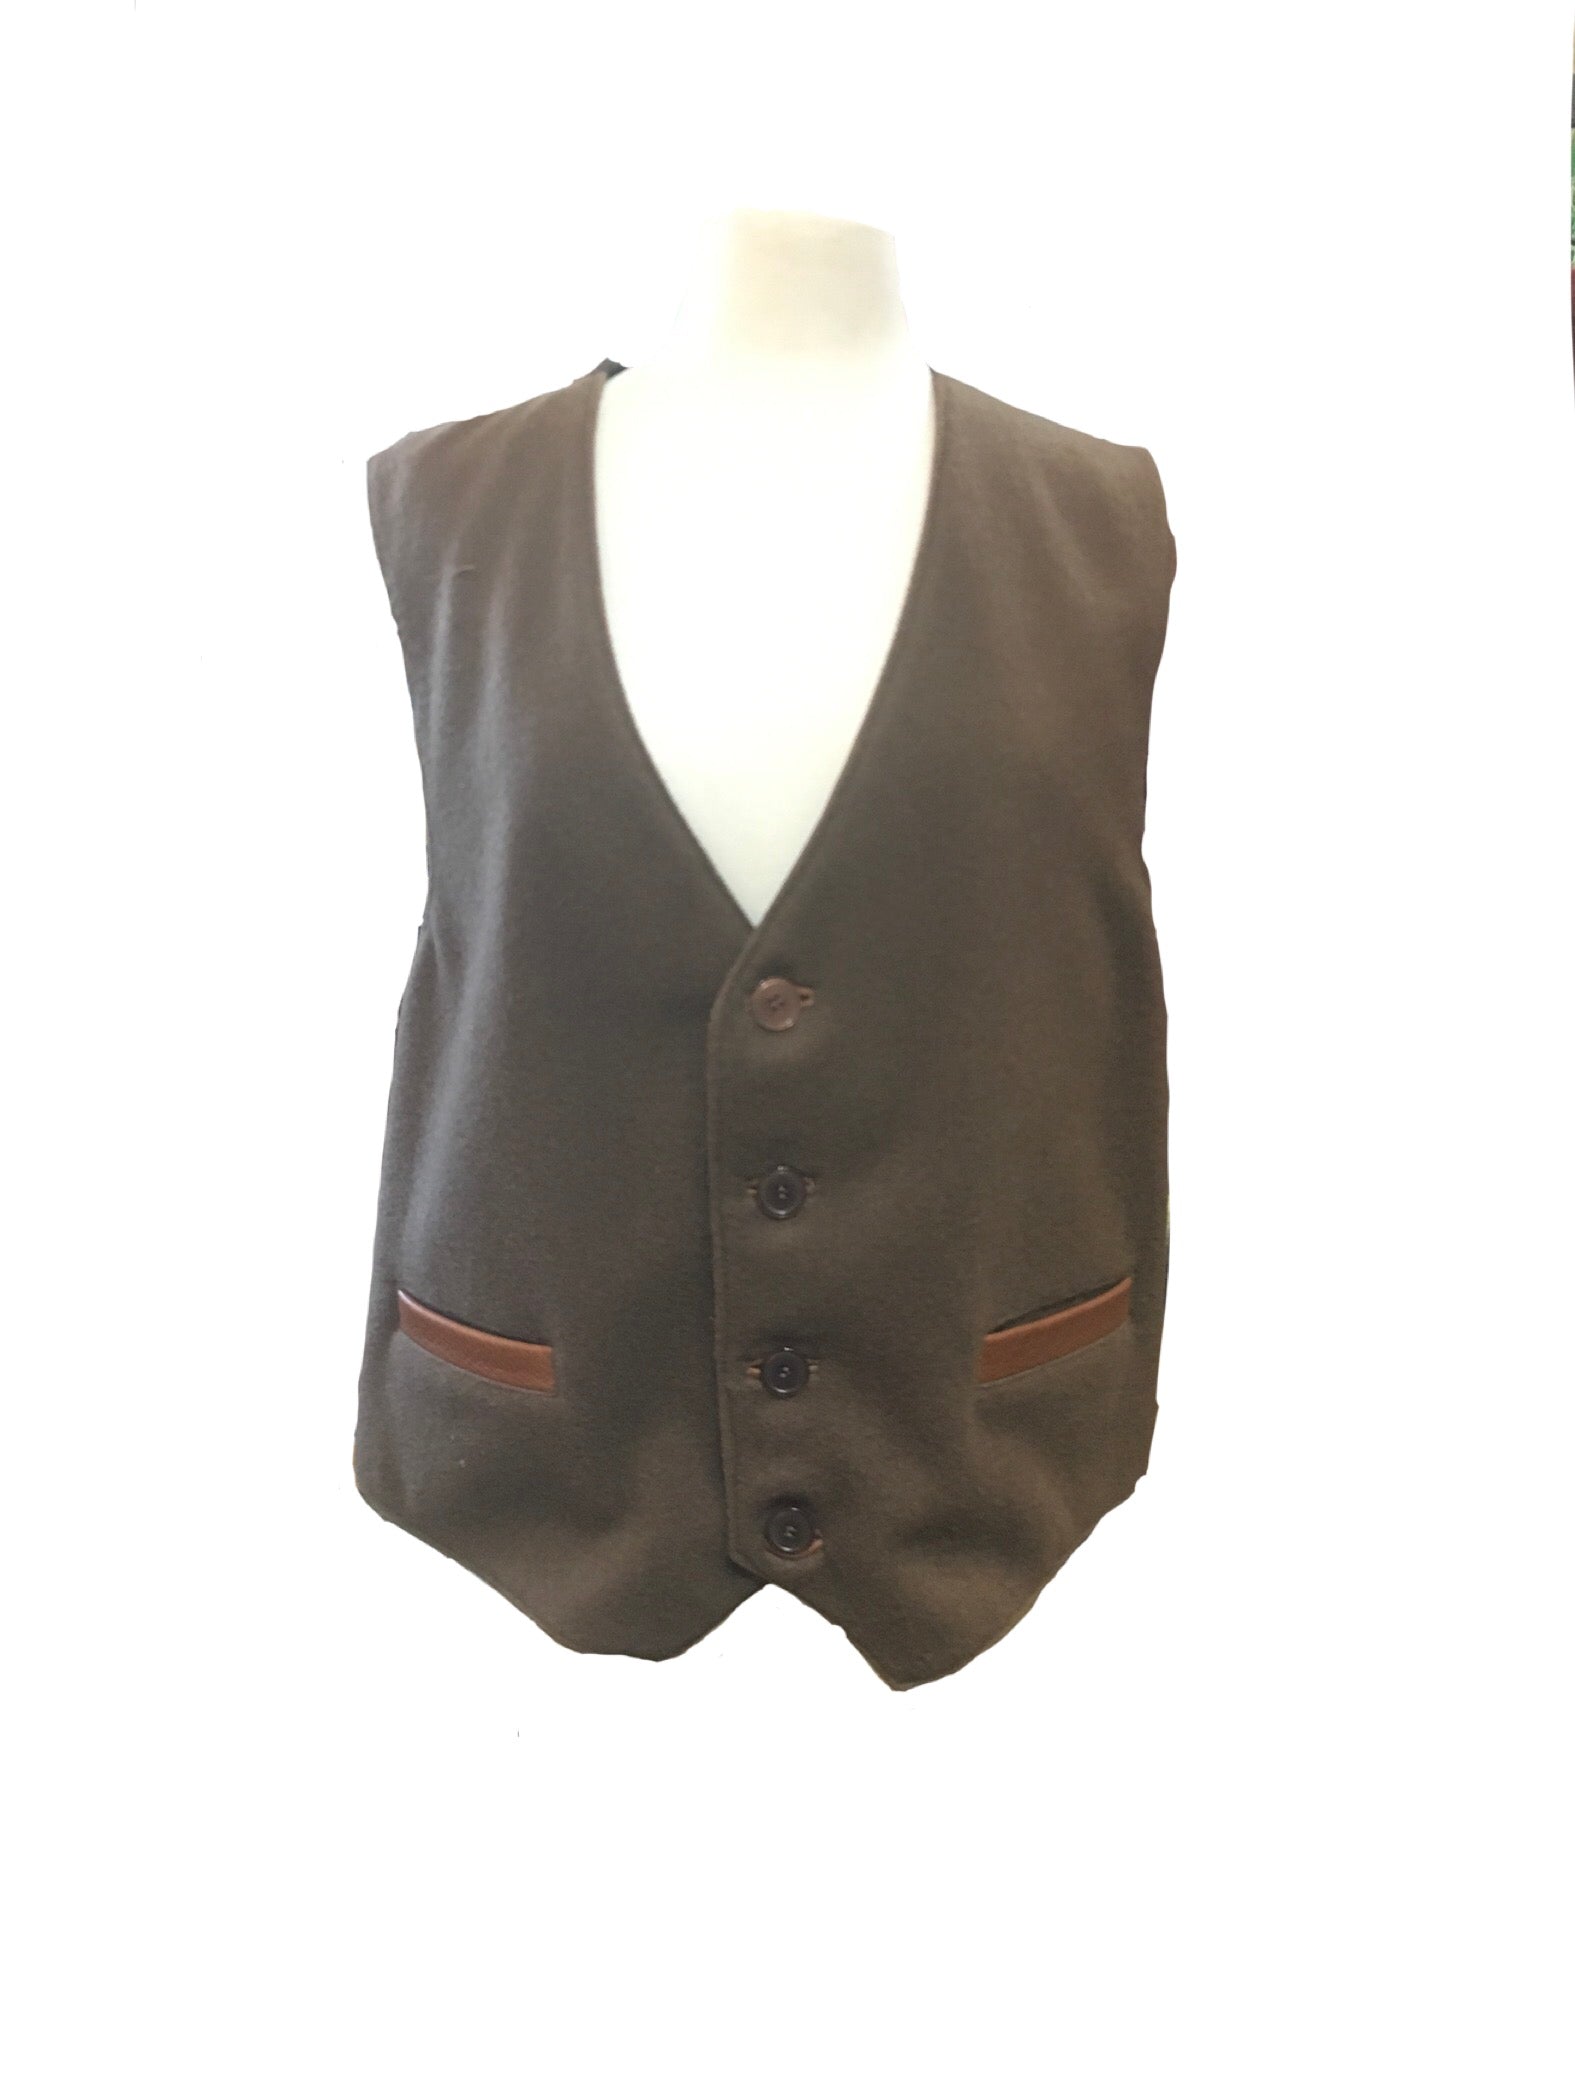 Bison Fabric and Leather Vests